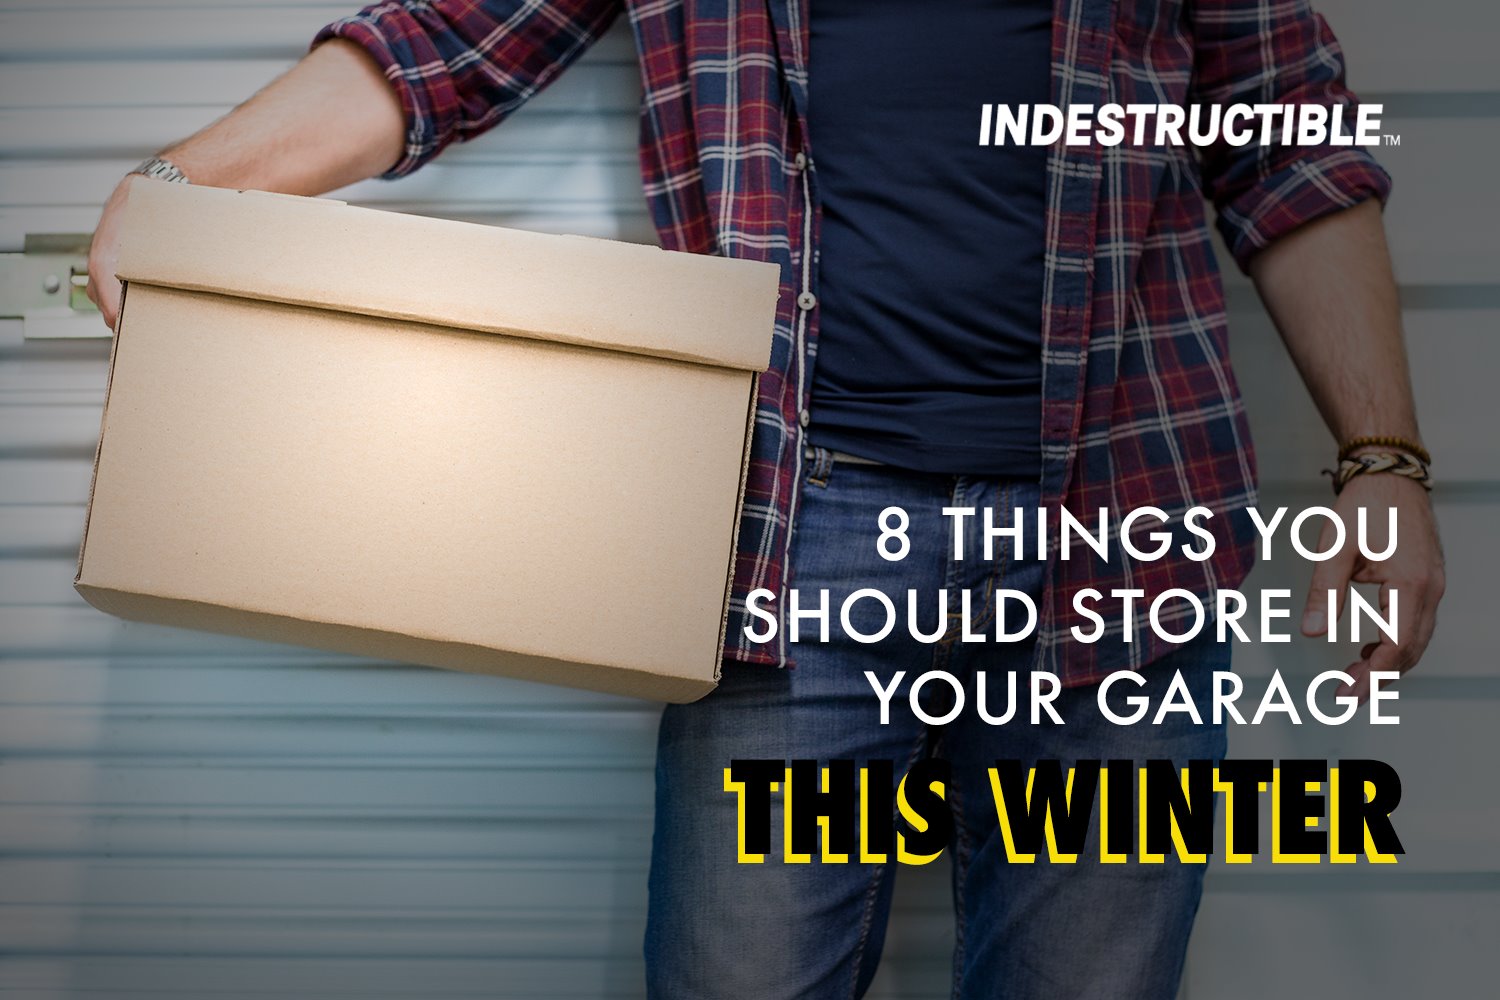 8 Things You Should Store In Your Garage This Winter